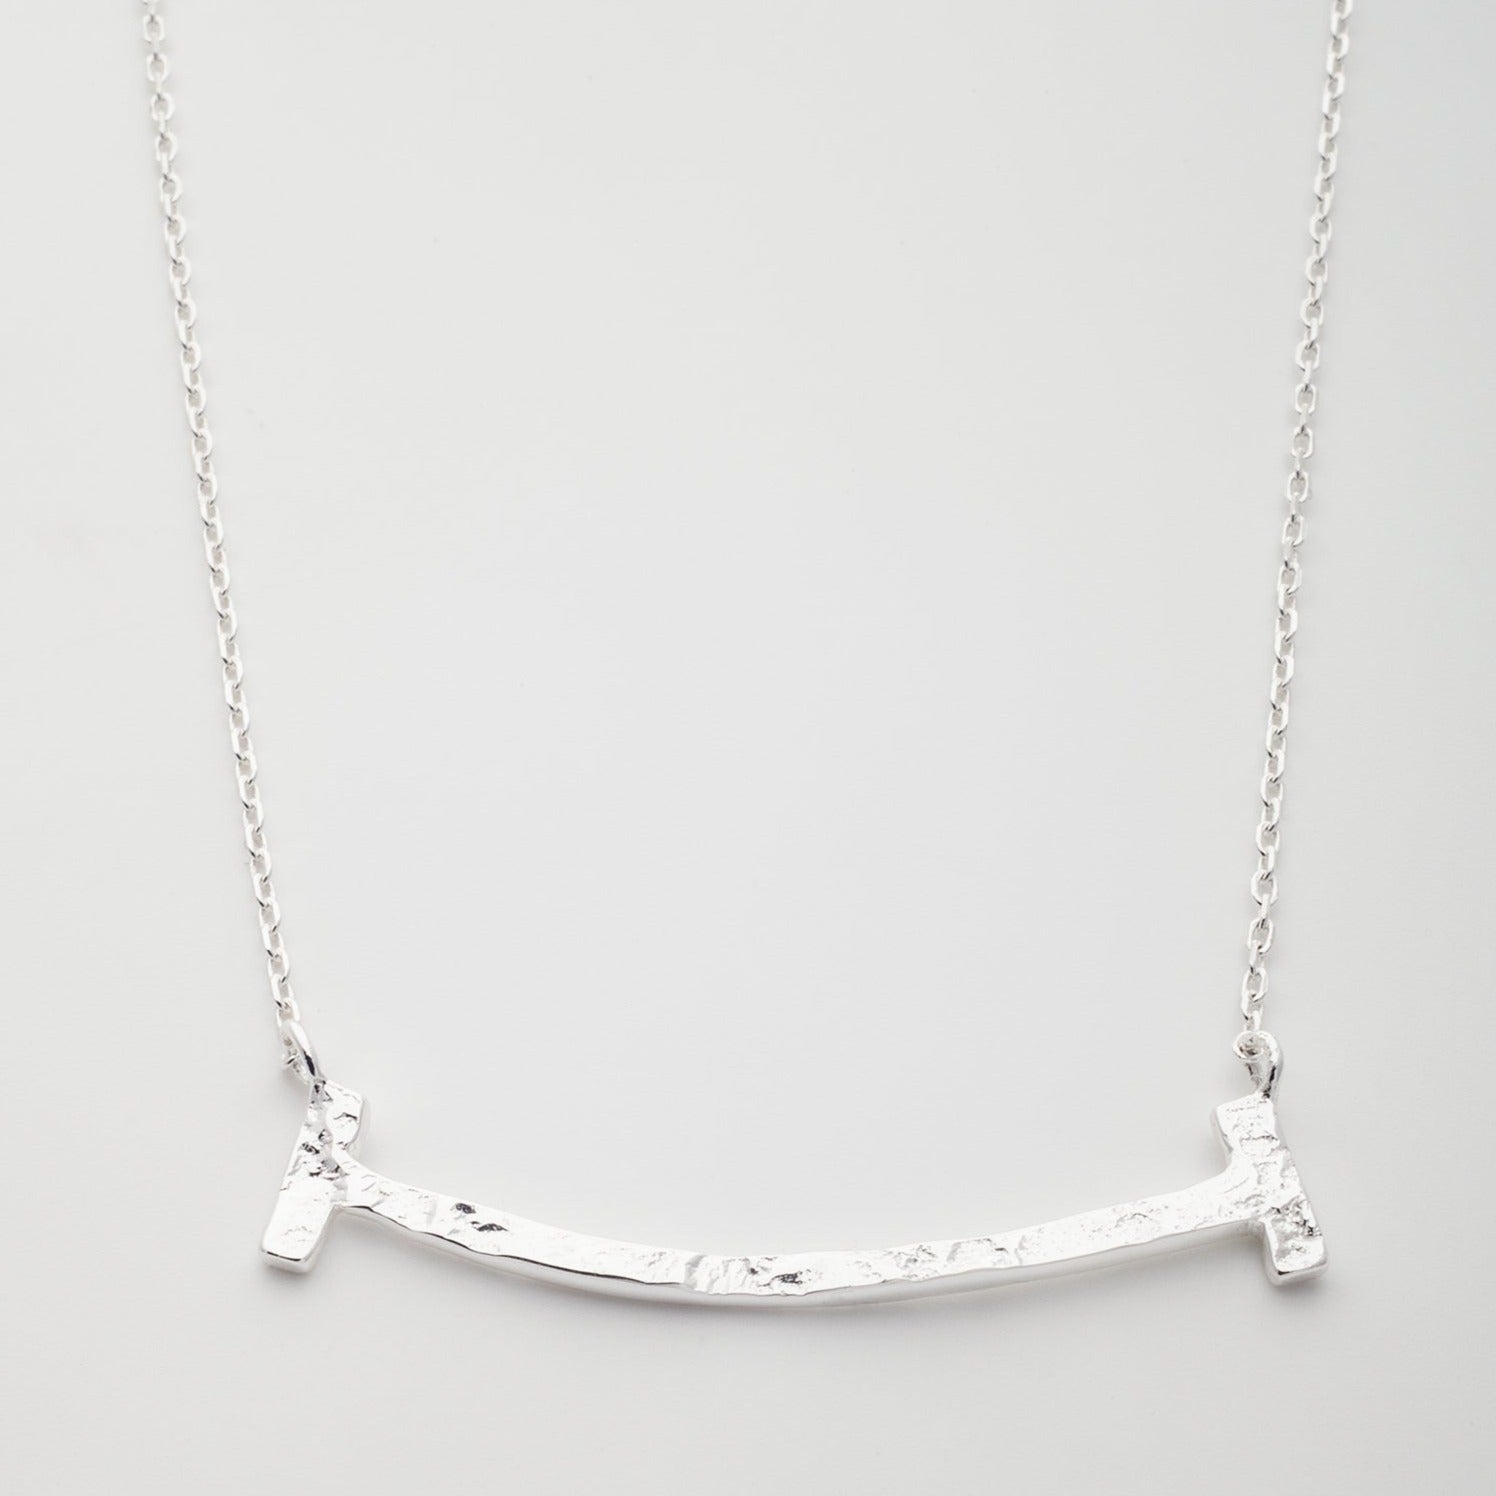 Bianca Bar Necklace in Silver